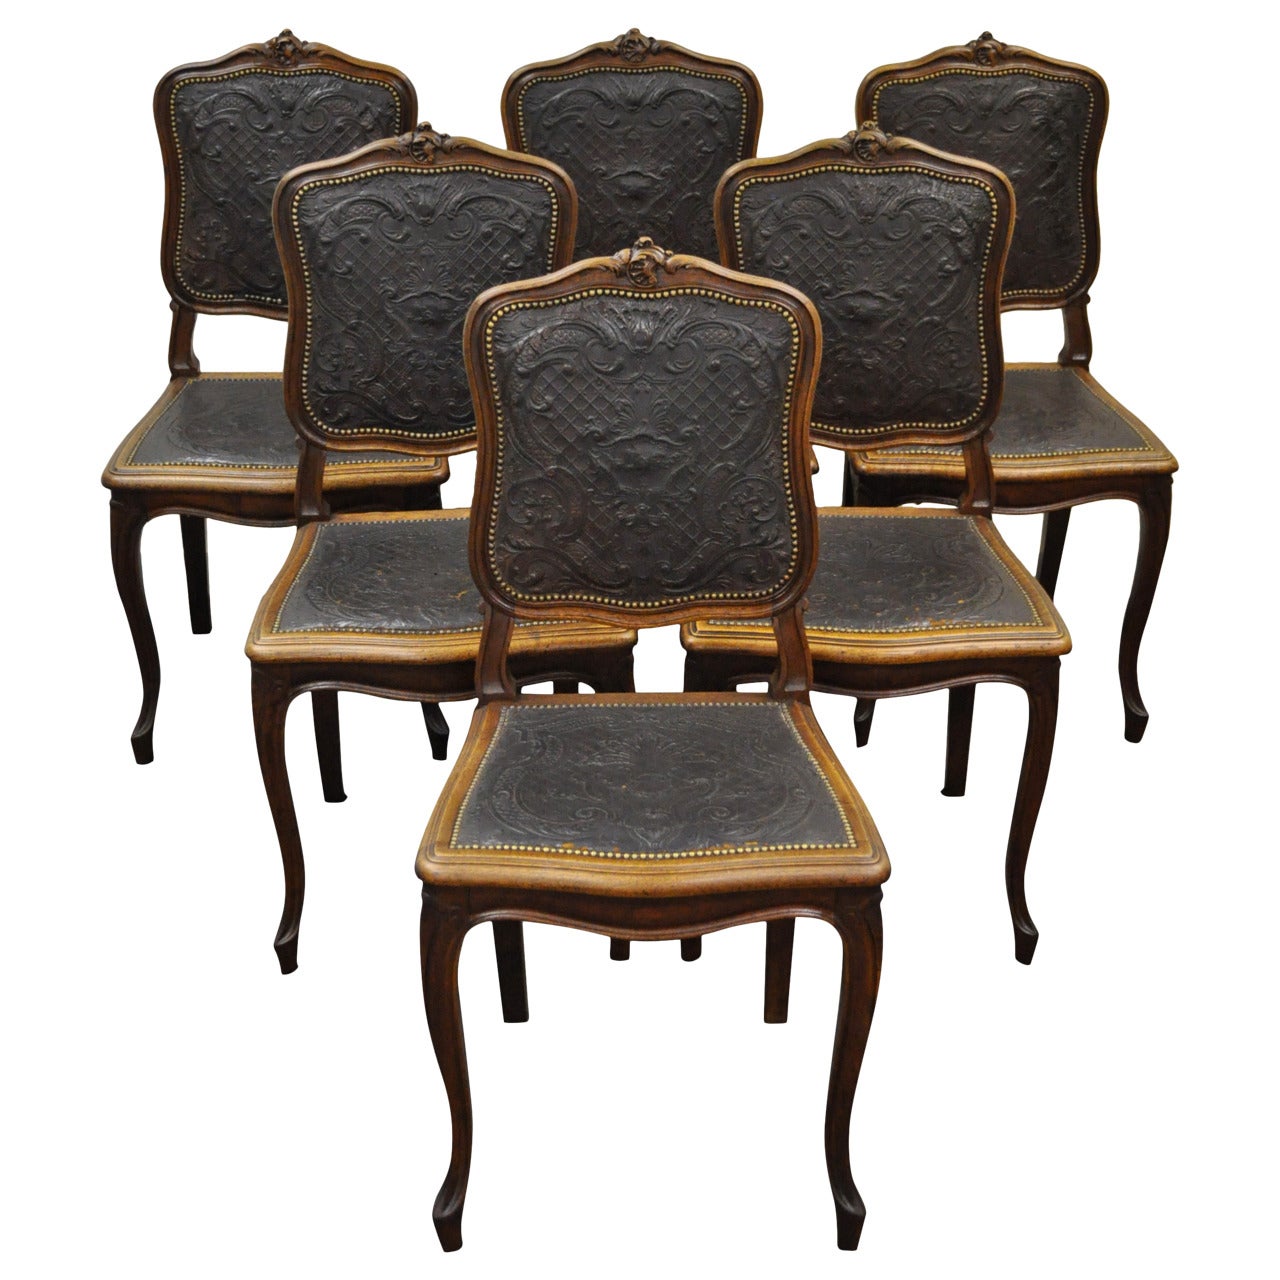 Six Early 20th C. French Louis XV Style Embossed Leather Walnut Dining Chairs